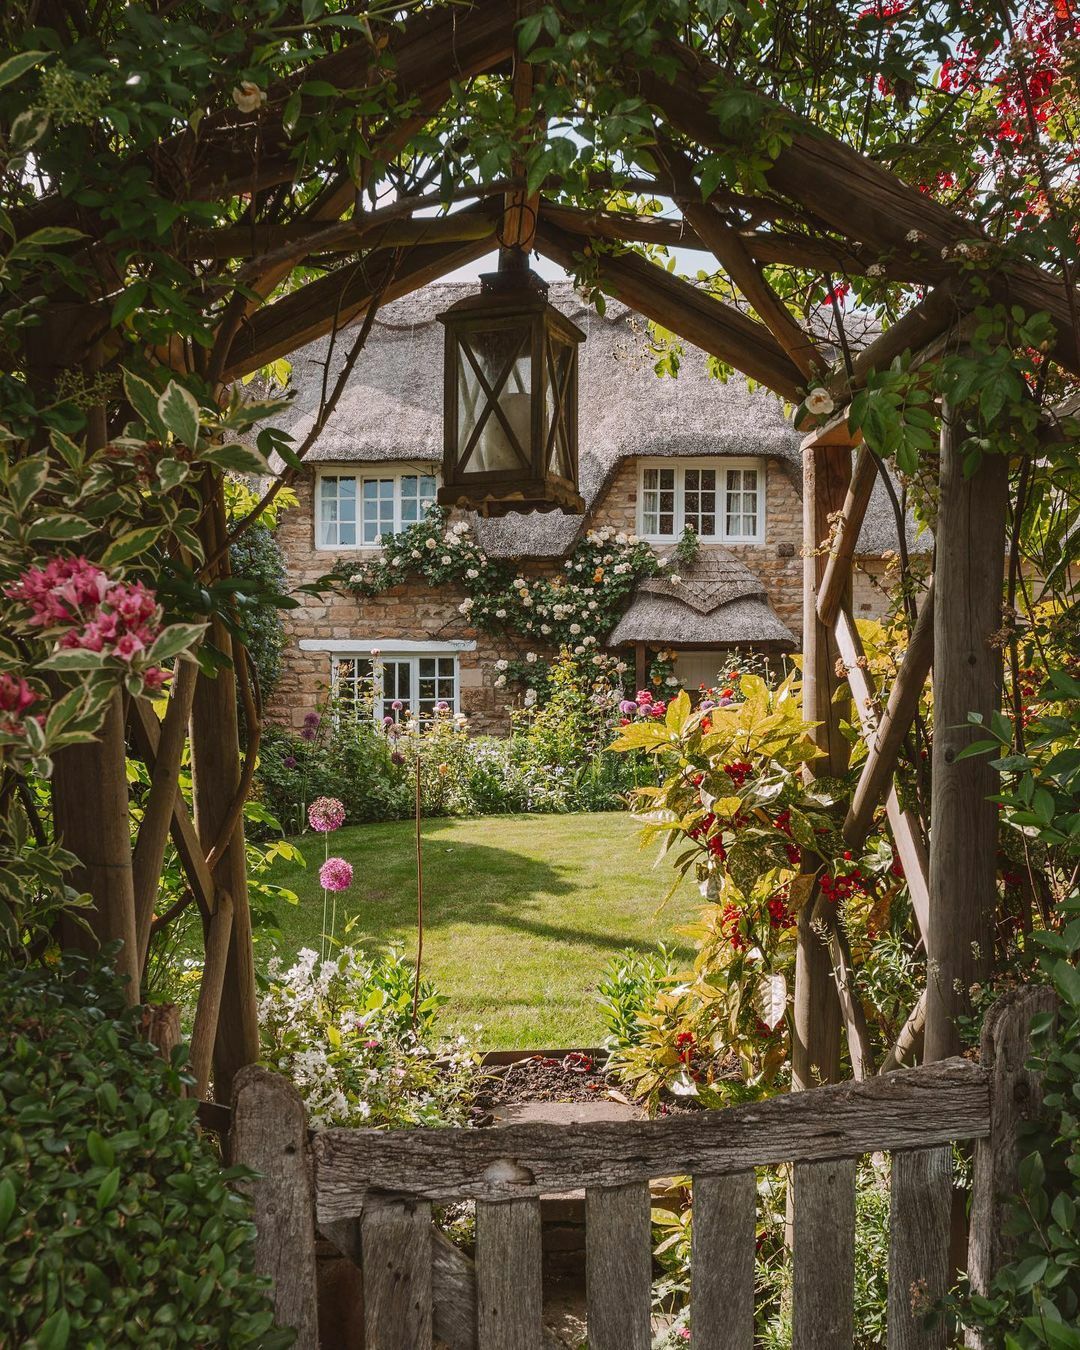 Thatched Roof Cottage Surrounded By Flowers, Rutland, East Midlands, England